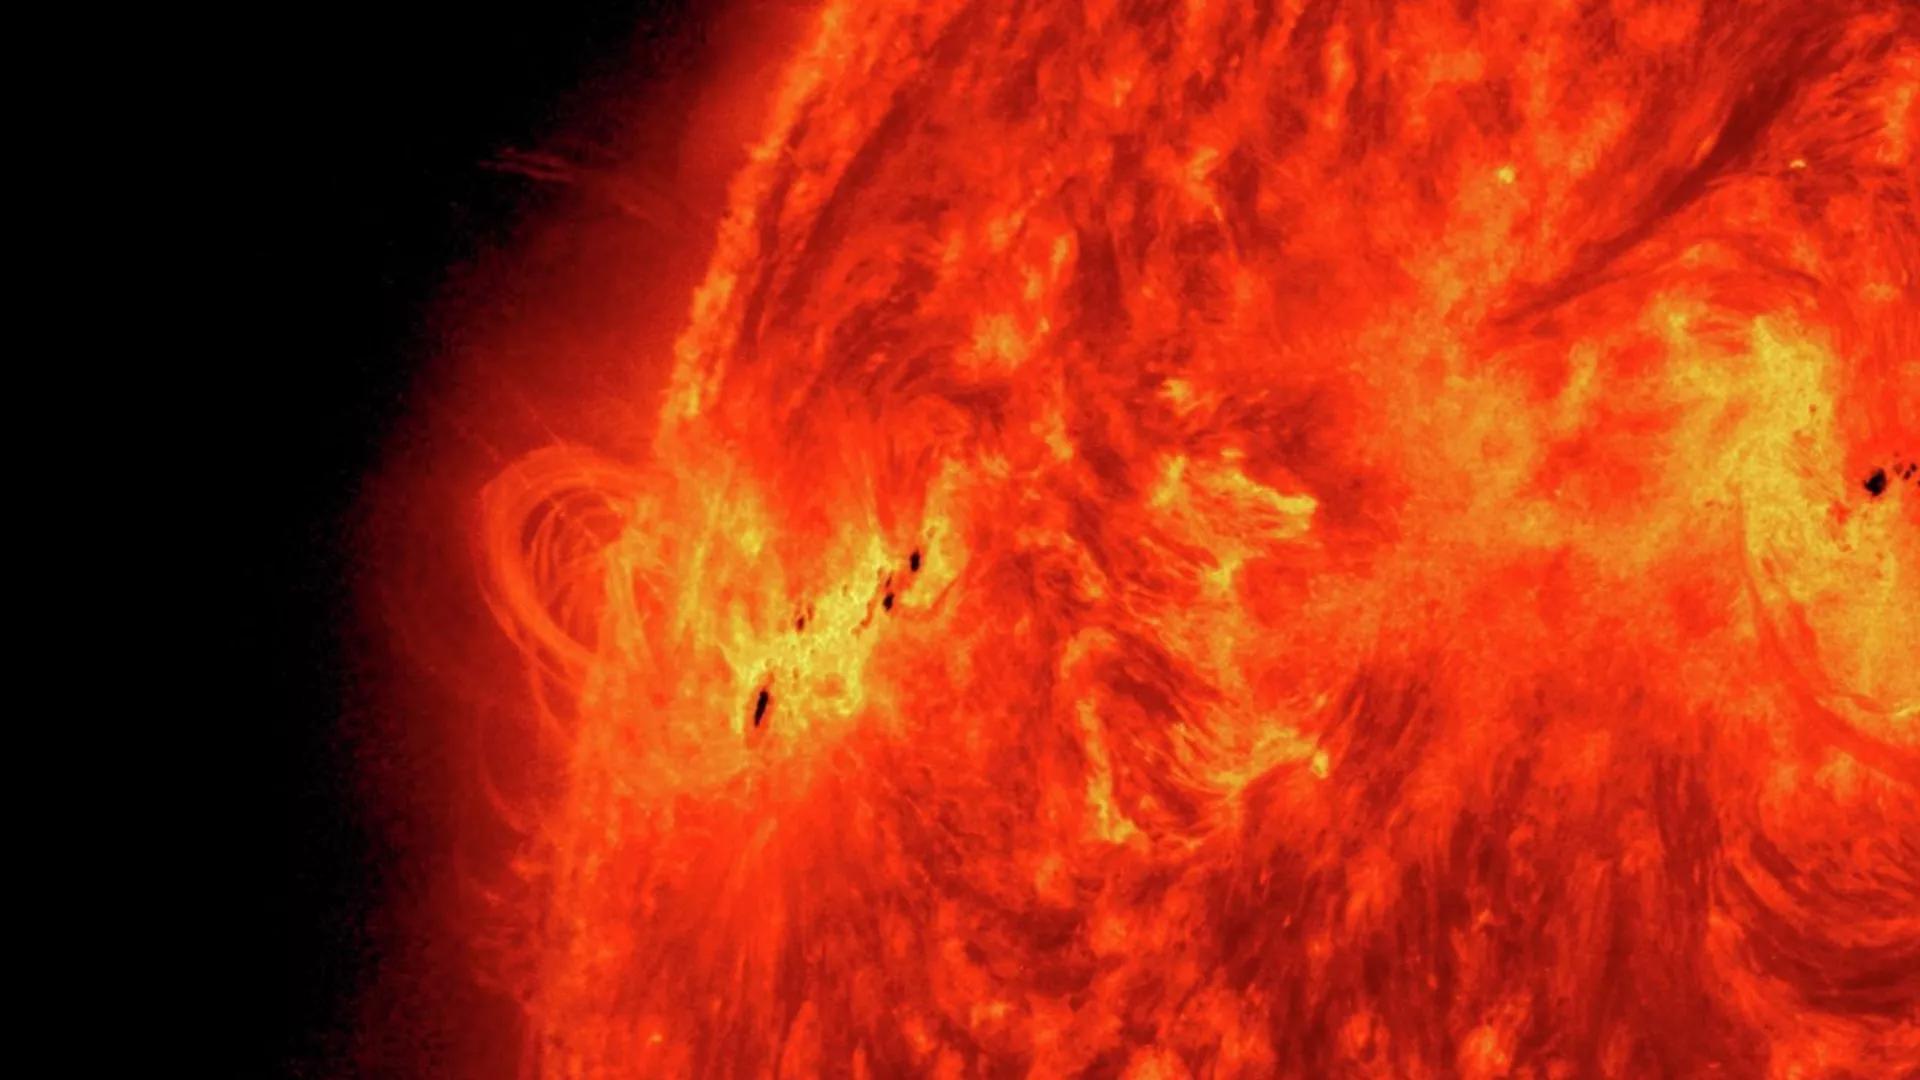 Stunning New Images of the Sun Released